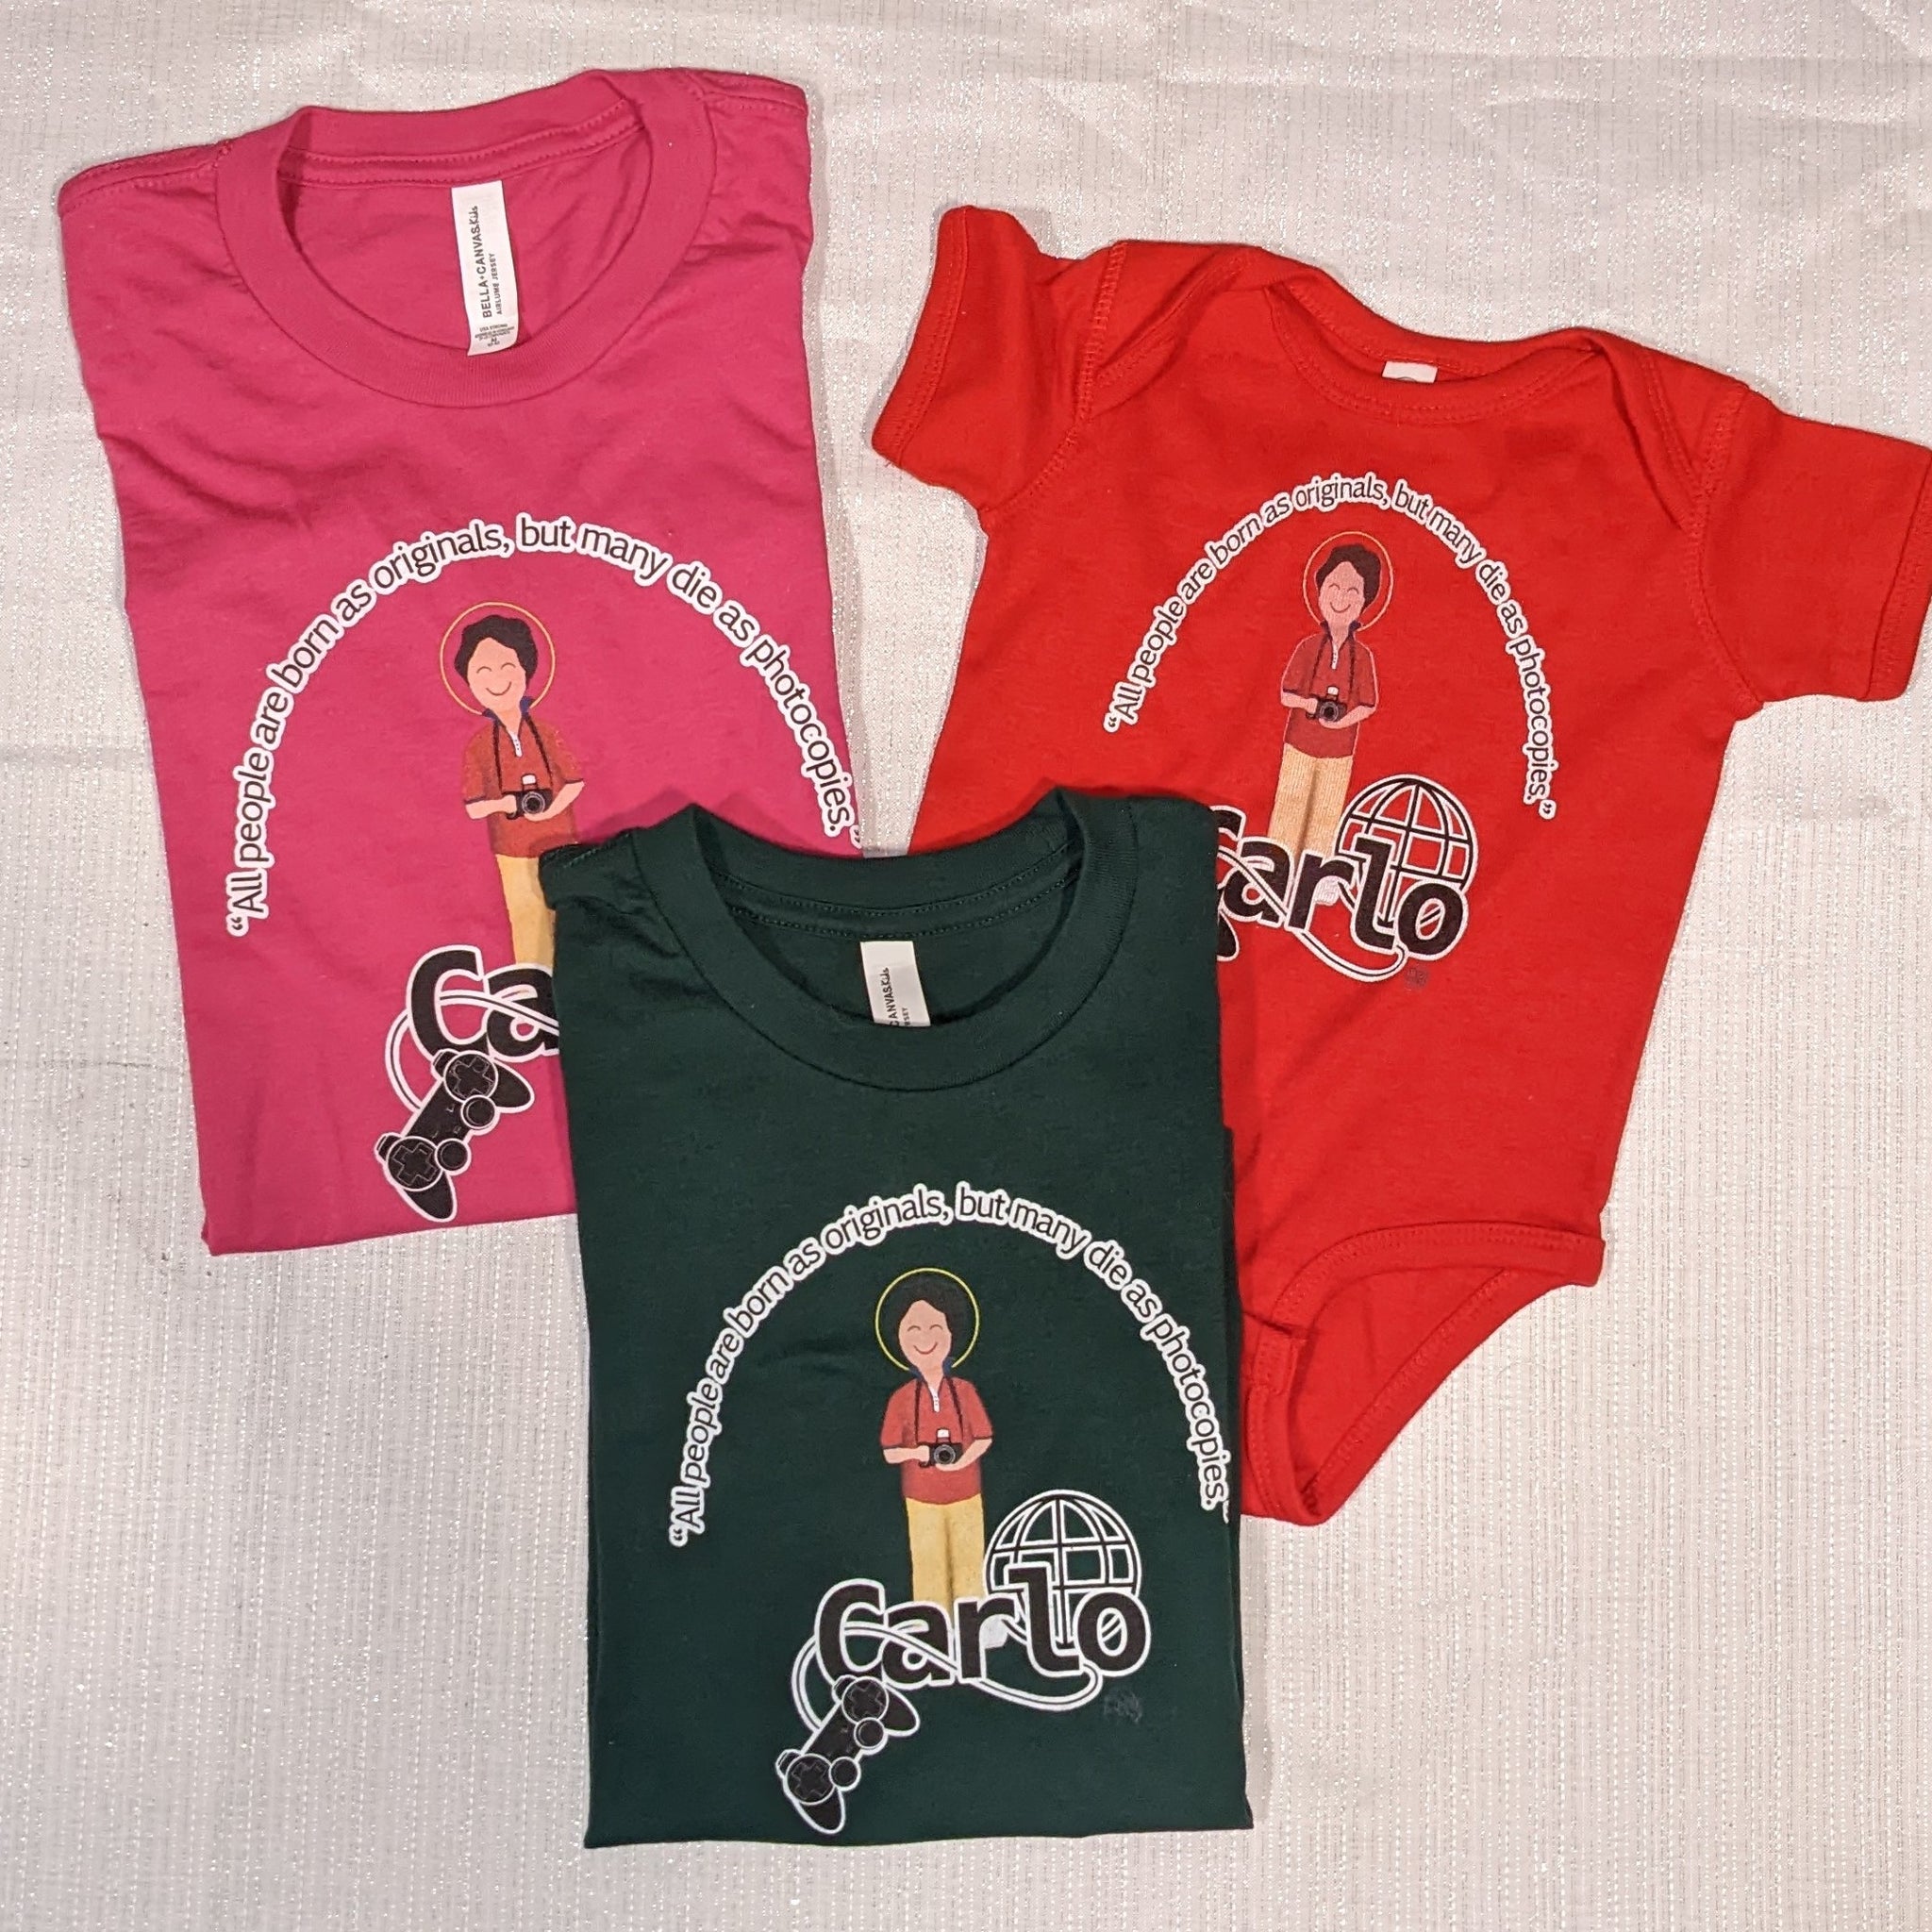 Bl. Carlo Acutis shirts in pink, black, and red - one adult shirt, one toddler shirt, and one baby bodysuit